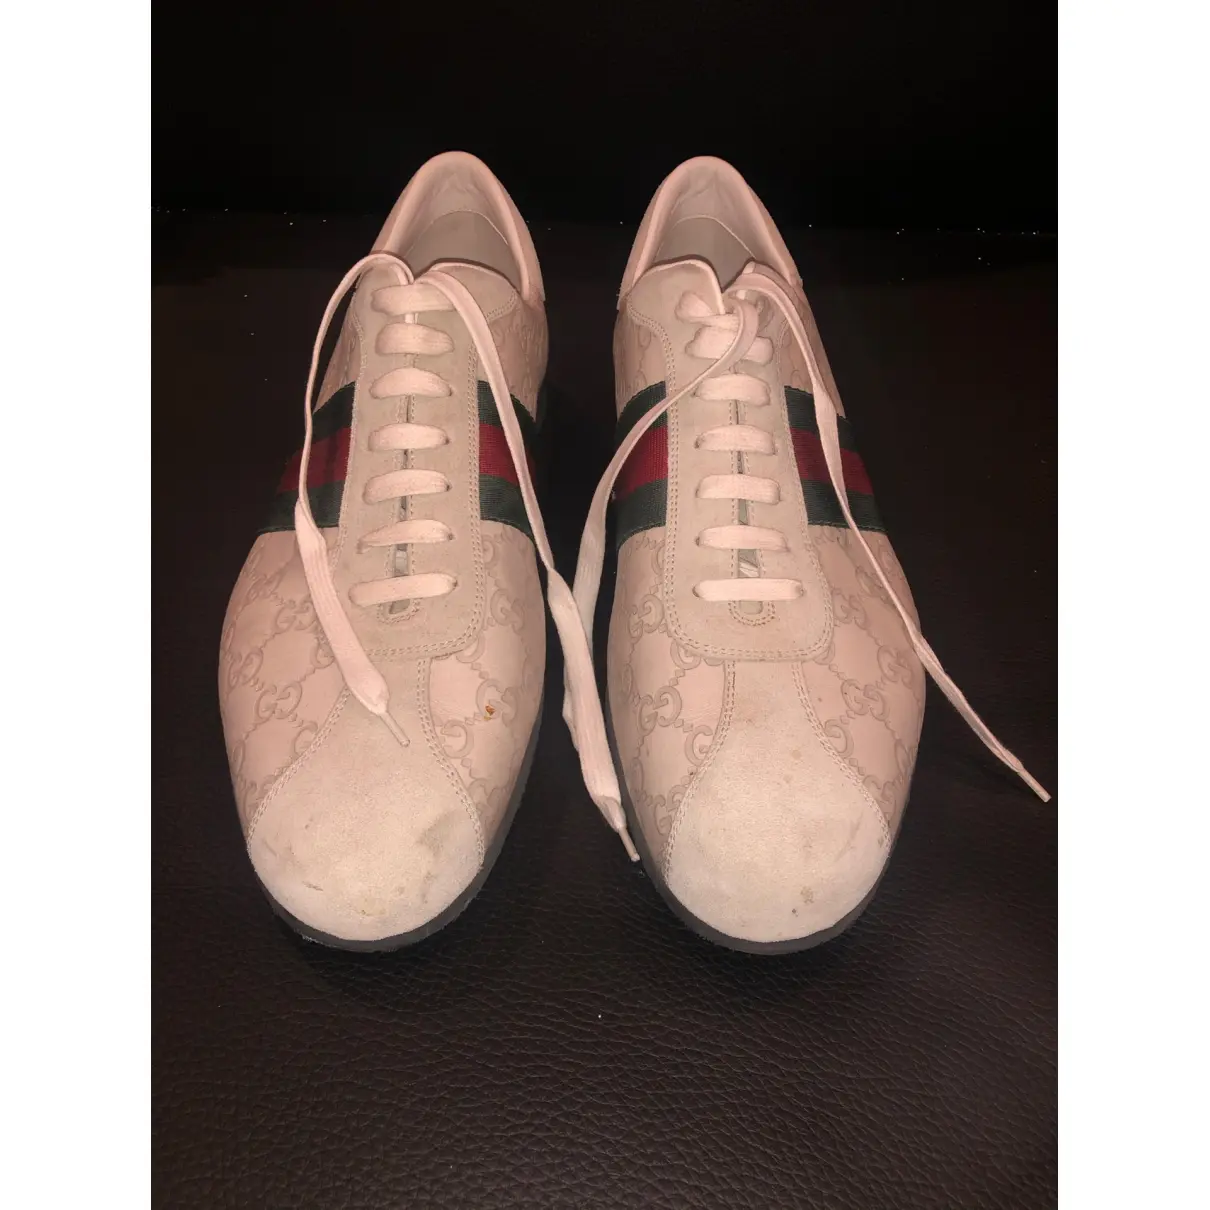 Buy Gucci Falacer leather low trainers online